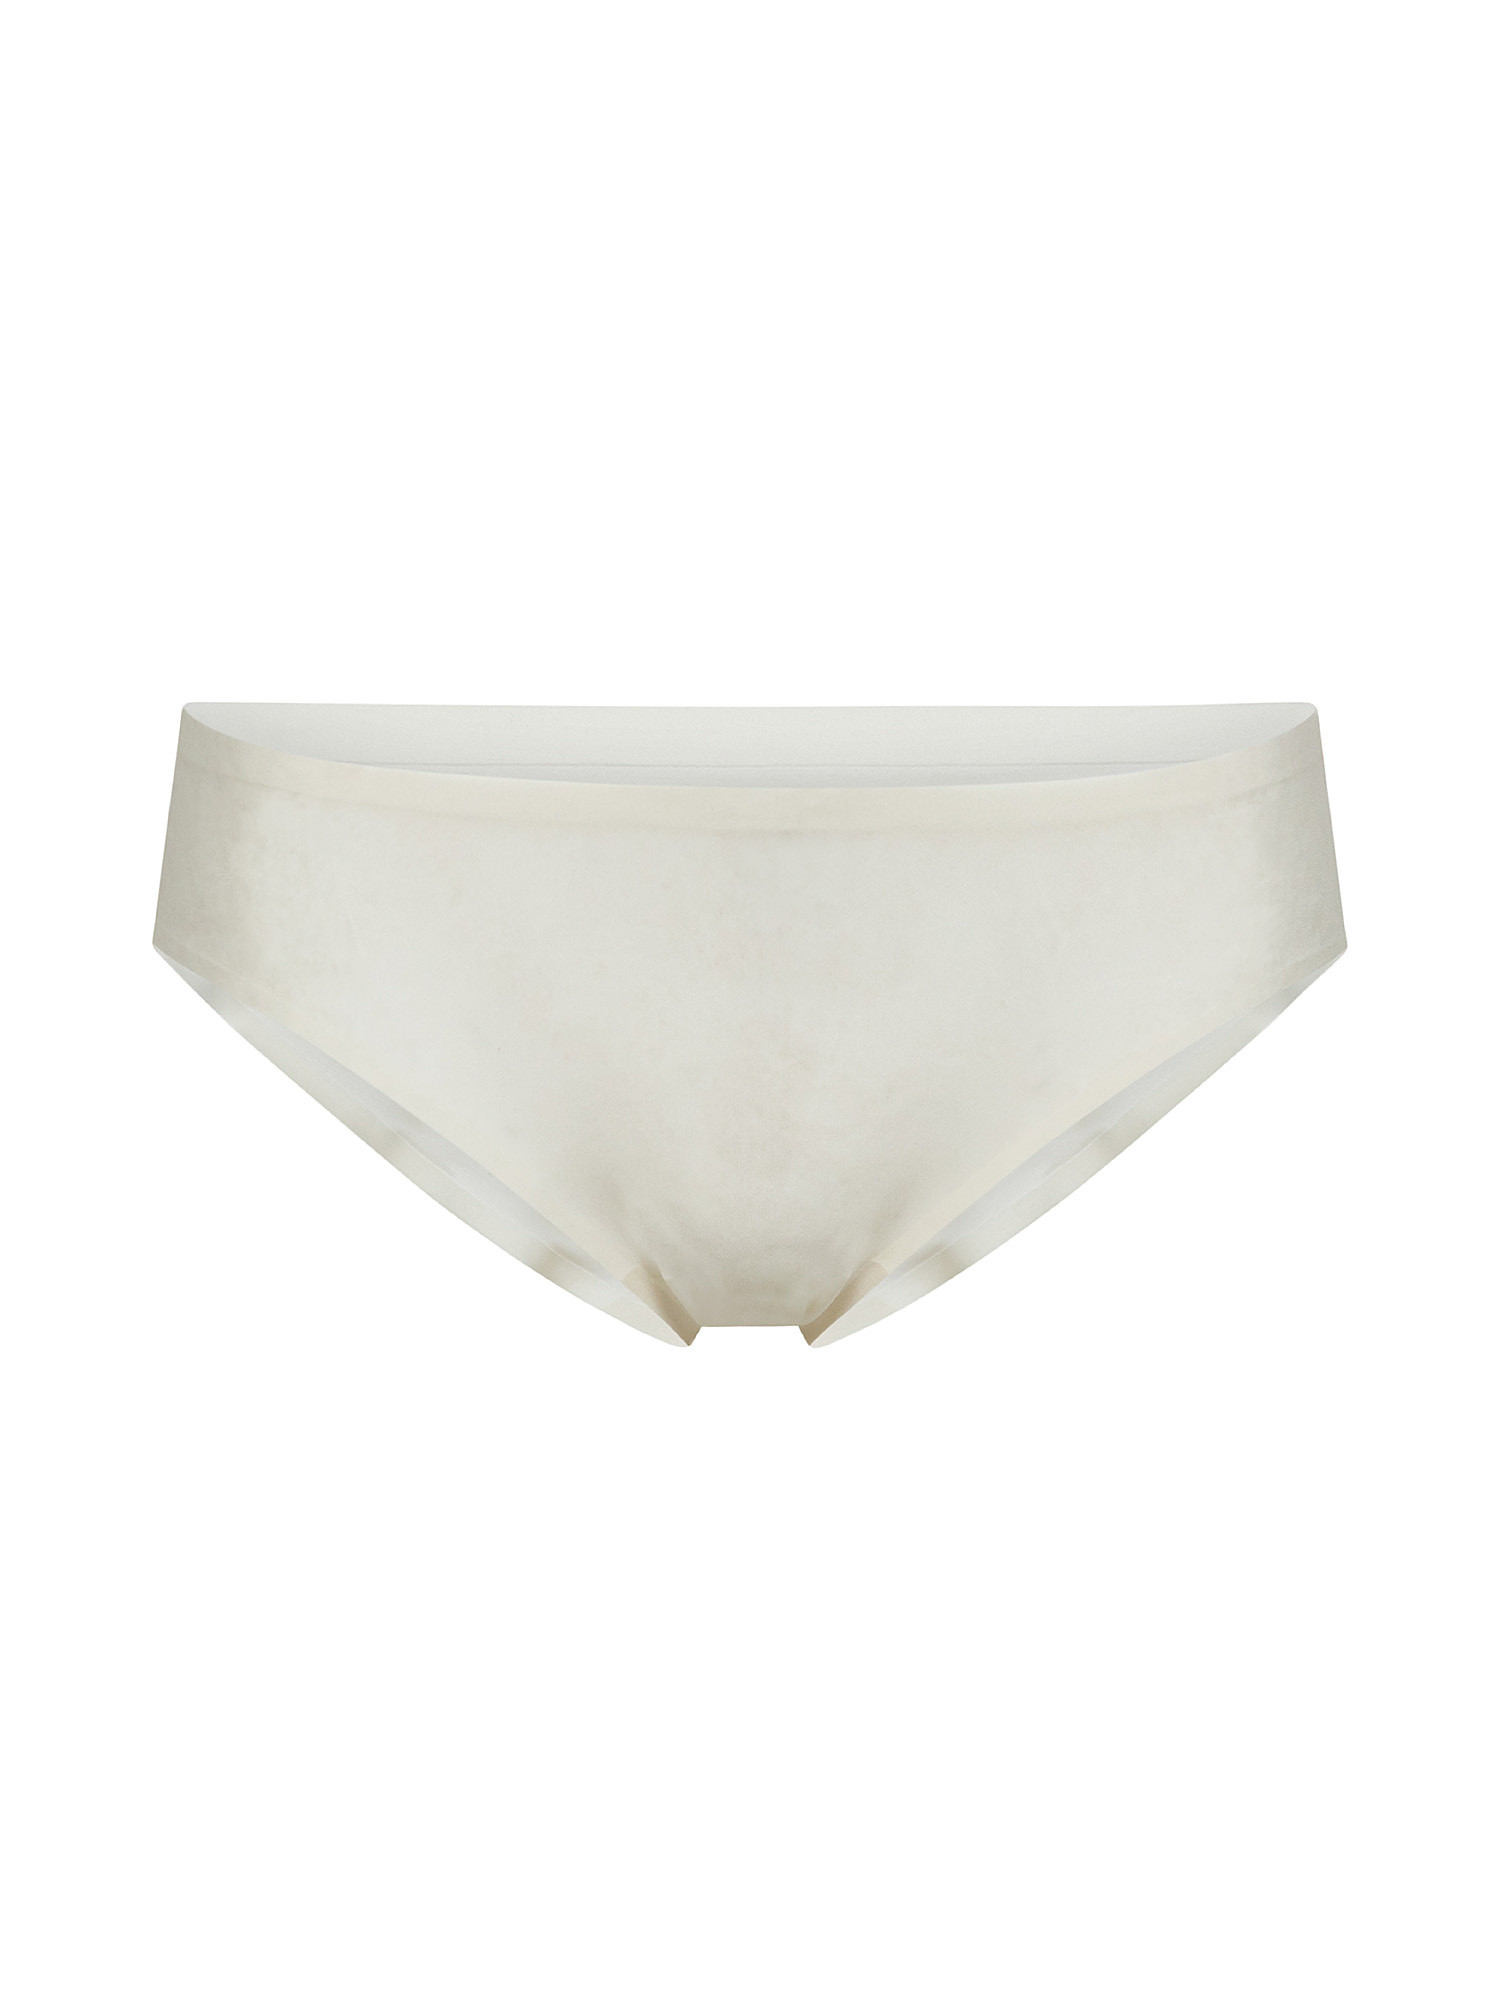 High-cut briefs on the hips, White Ivory, large image number 0